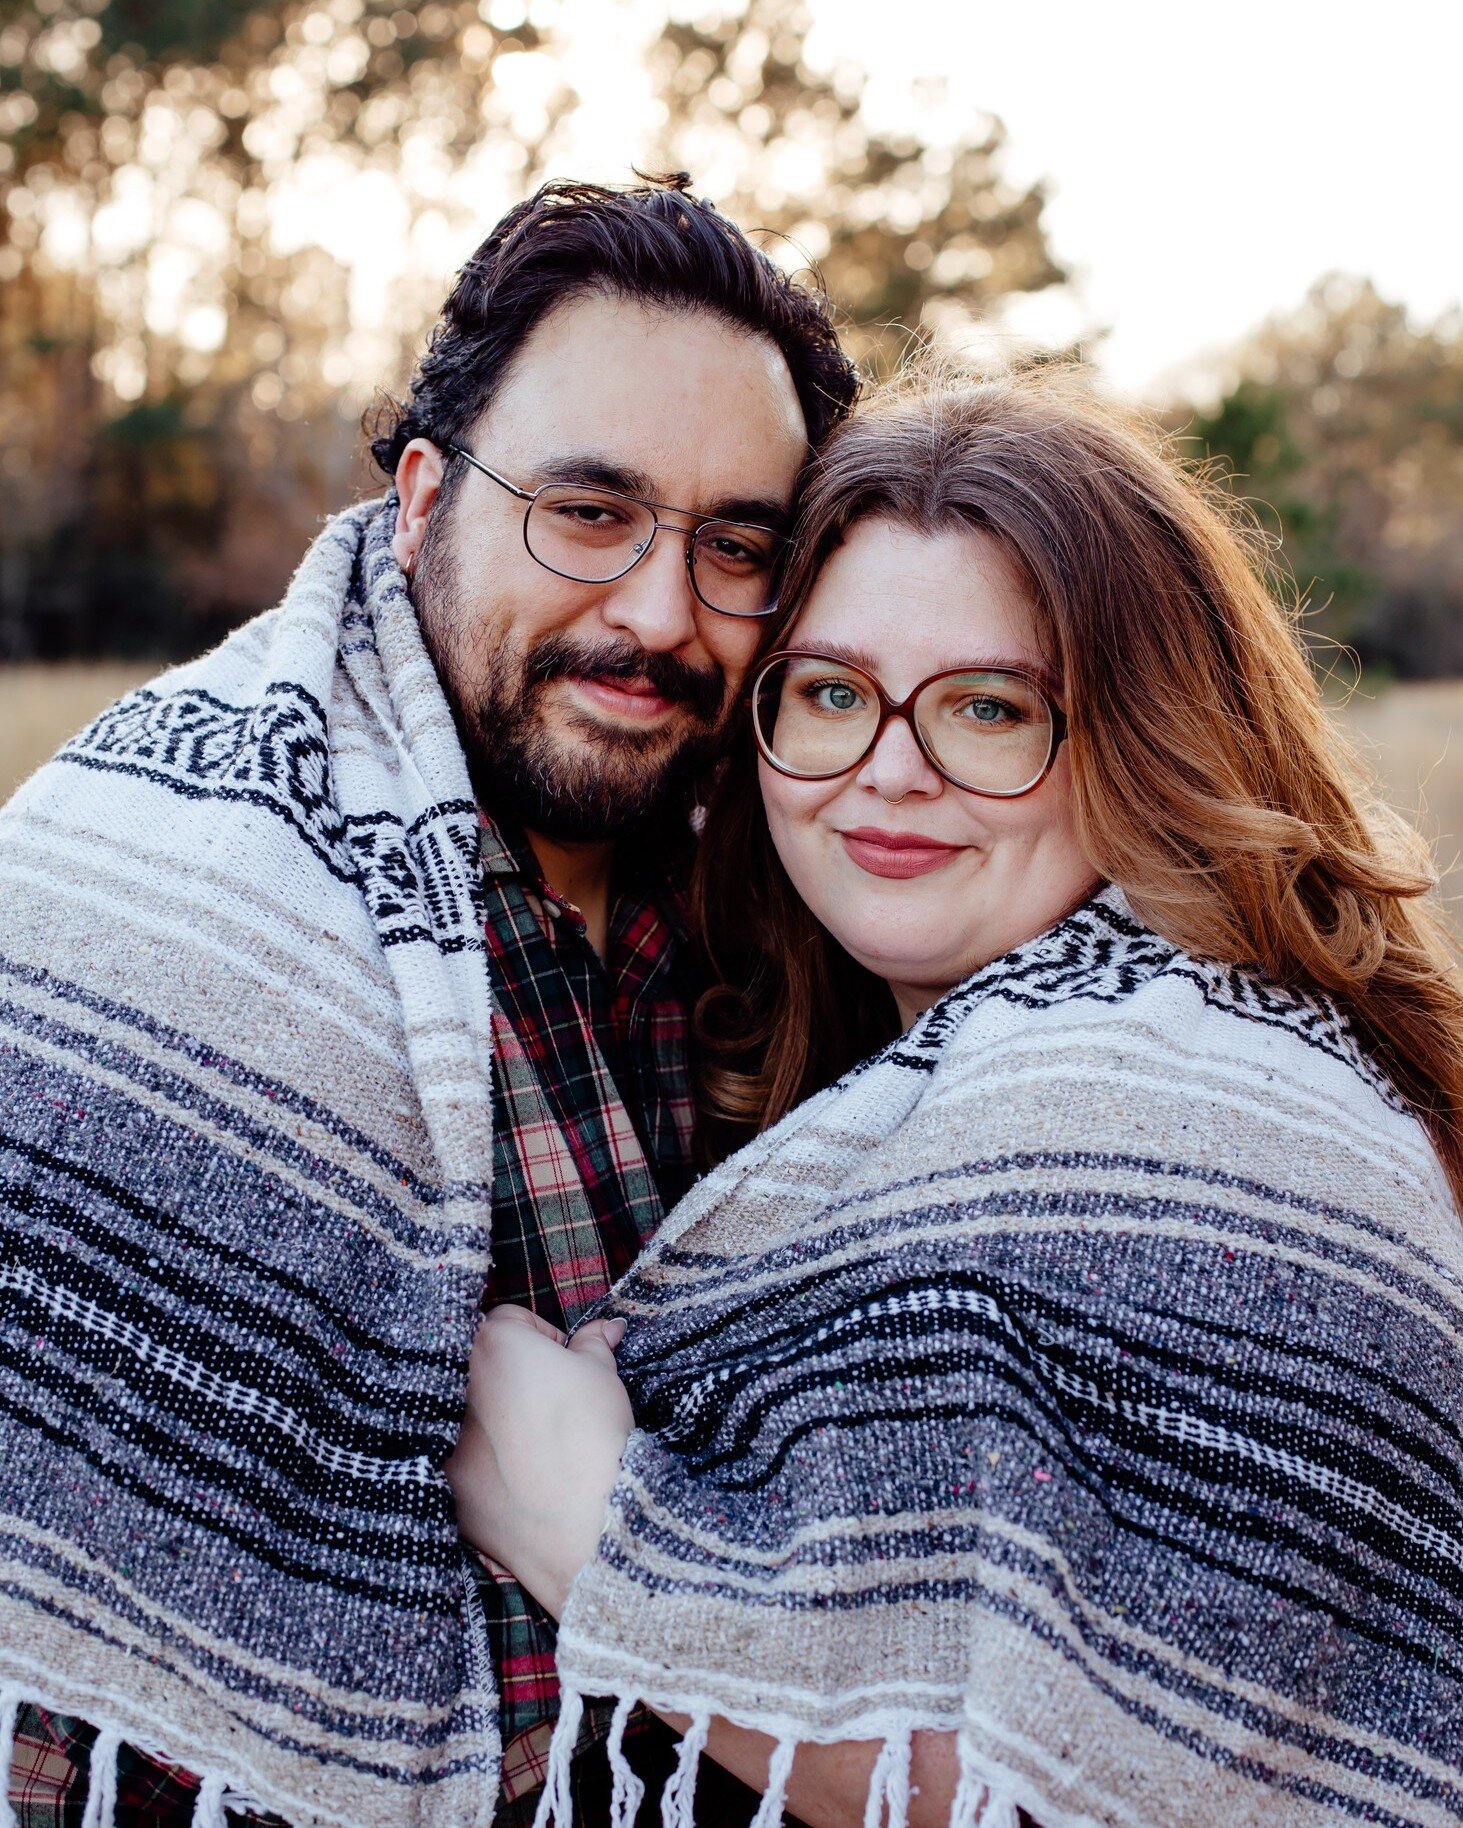 I'm so in love with this shoot! The love these two share is just the sweetest! &lt;3 This engagement session had two parts, will post part 2 at a later date. I can't decide which is my favorite!